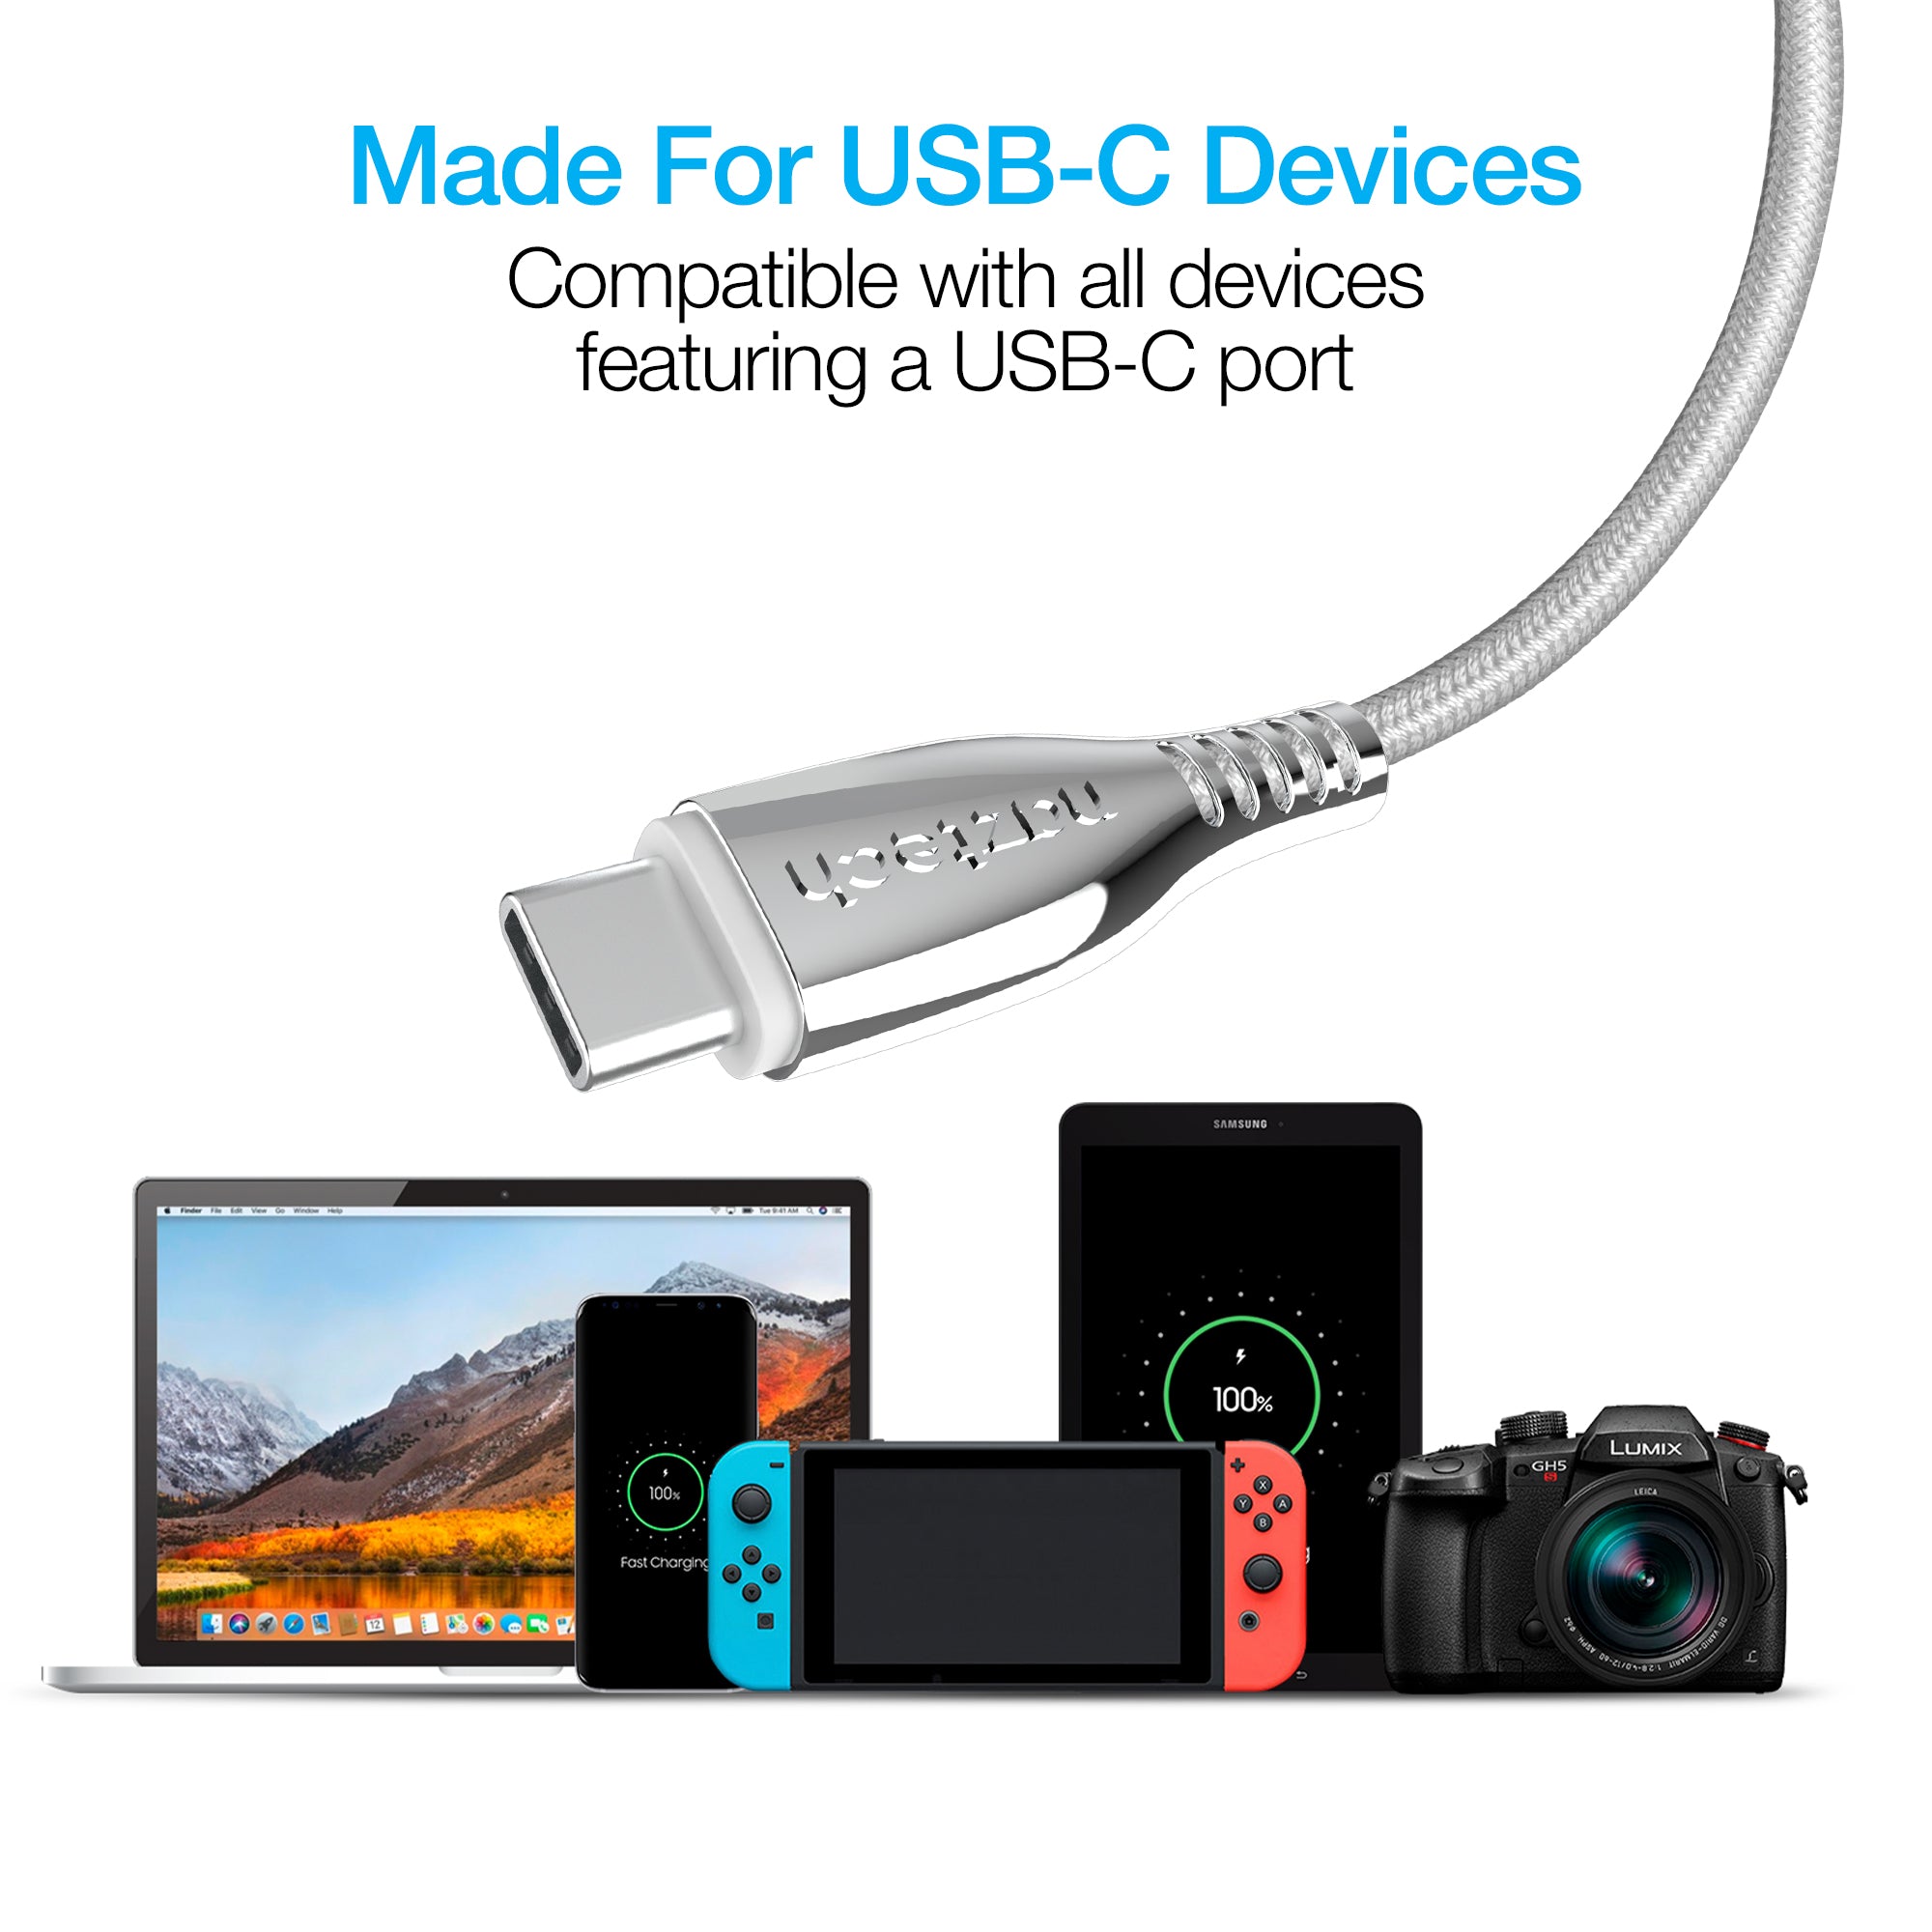 Cable usb C a lightning 1m